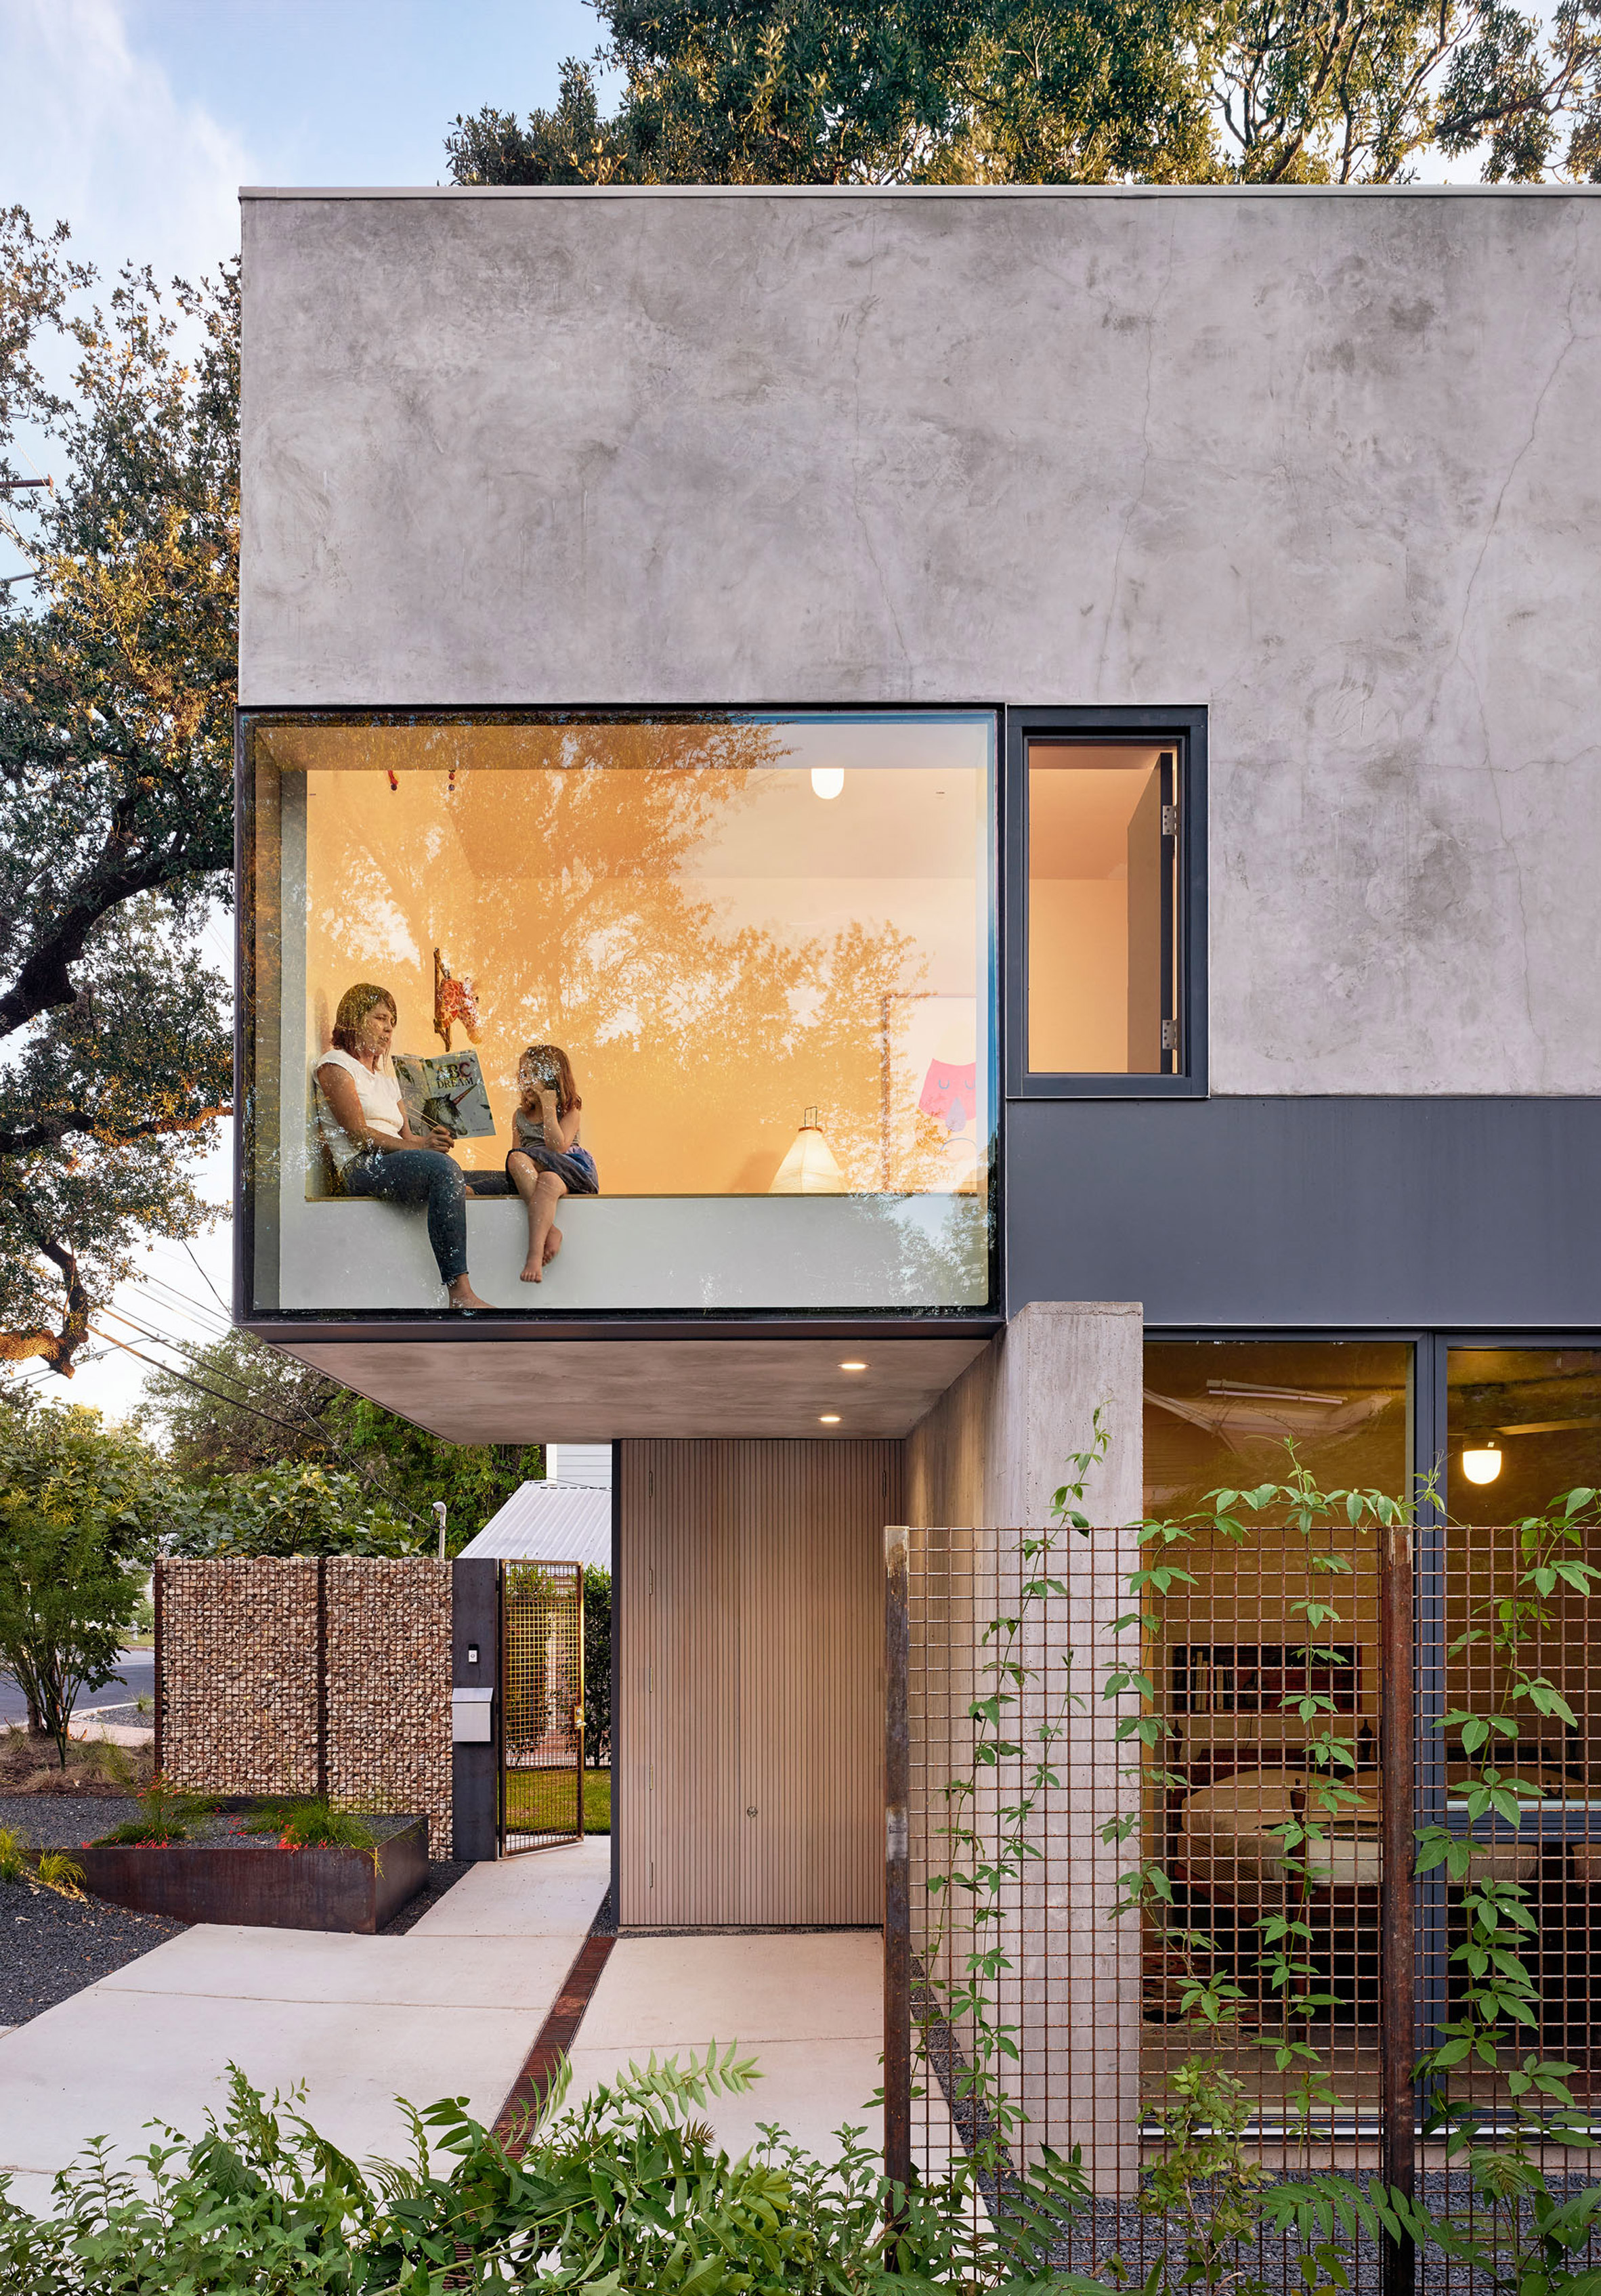 AIA Small Projects 2019, South Fifth Residence